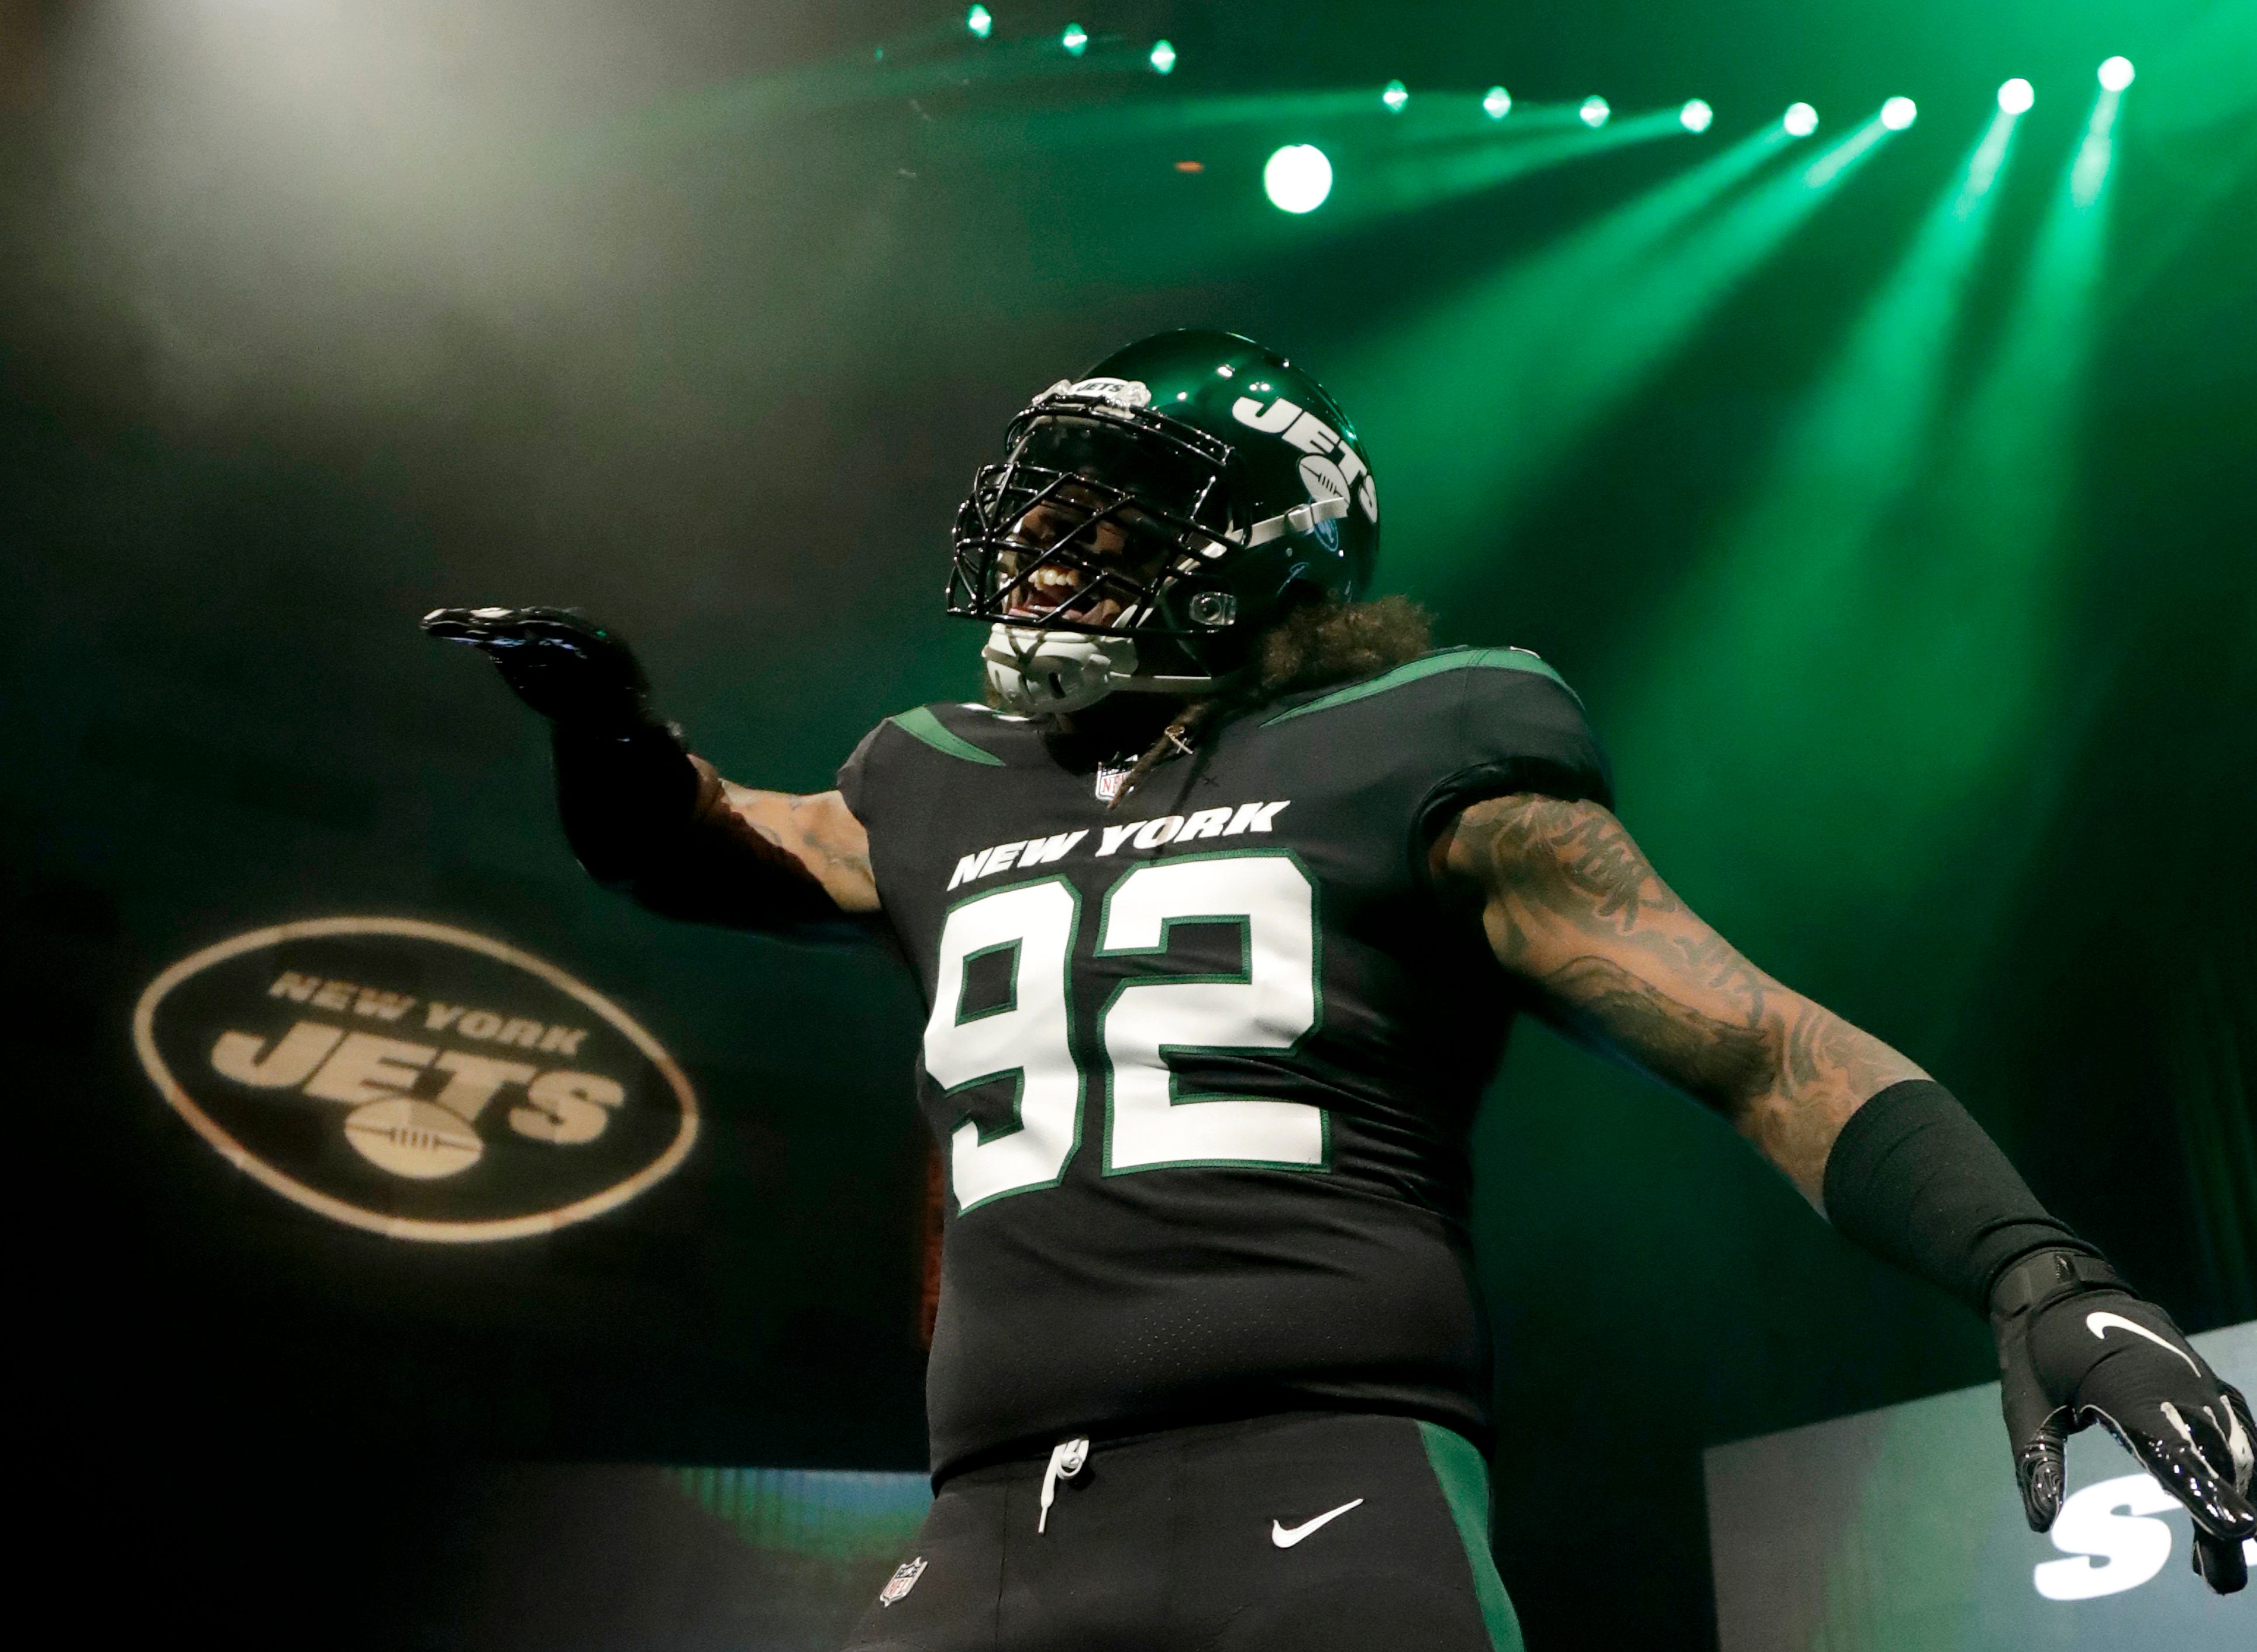 jets jersey black and green